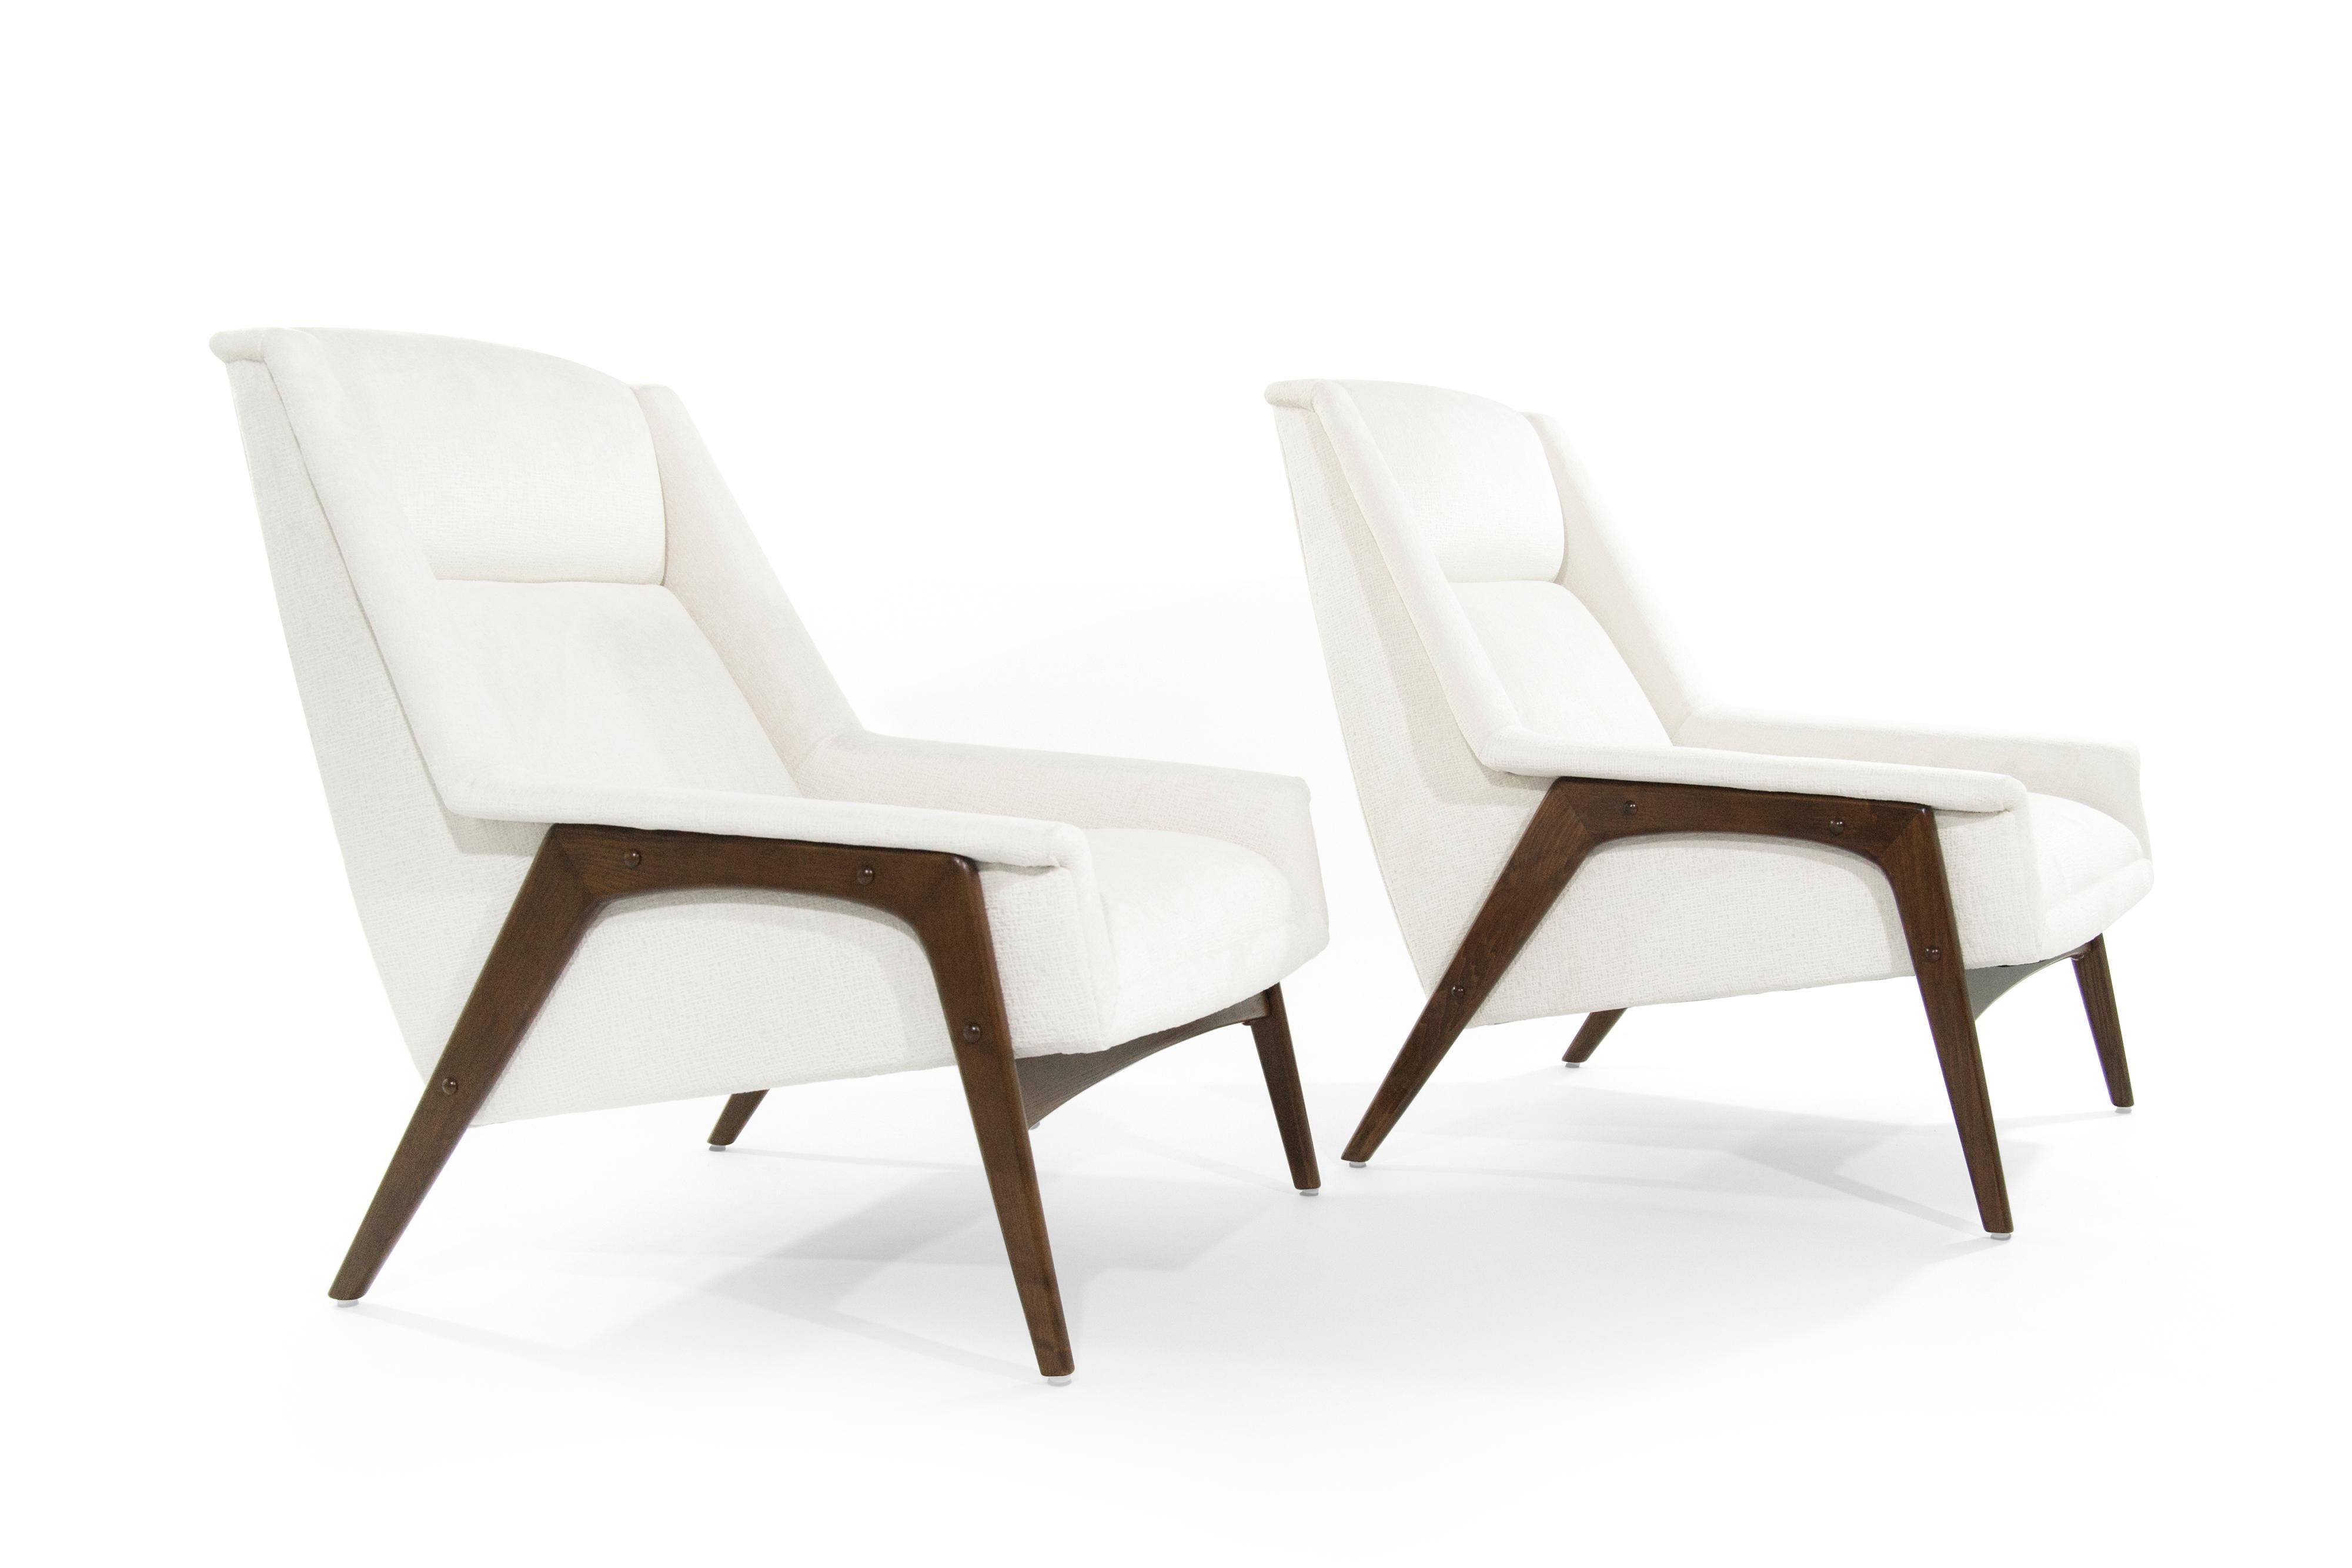 20th Century Folke Ohlsson for DUX Lounge Chairs, Sweden, 1960s